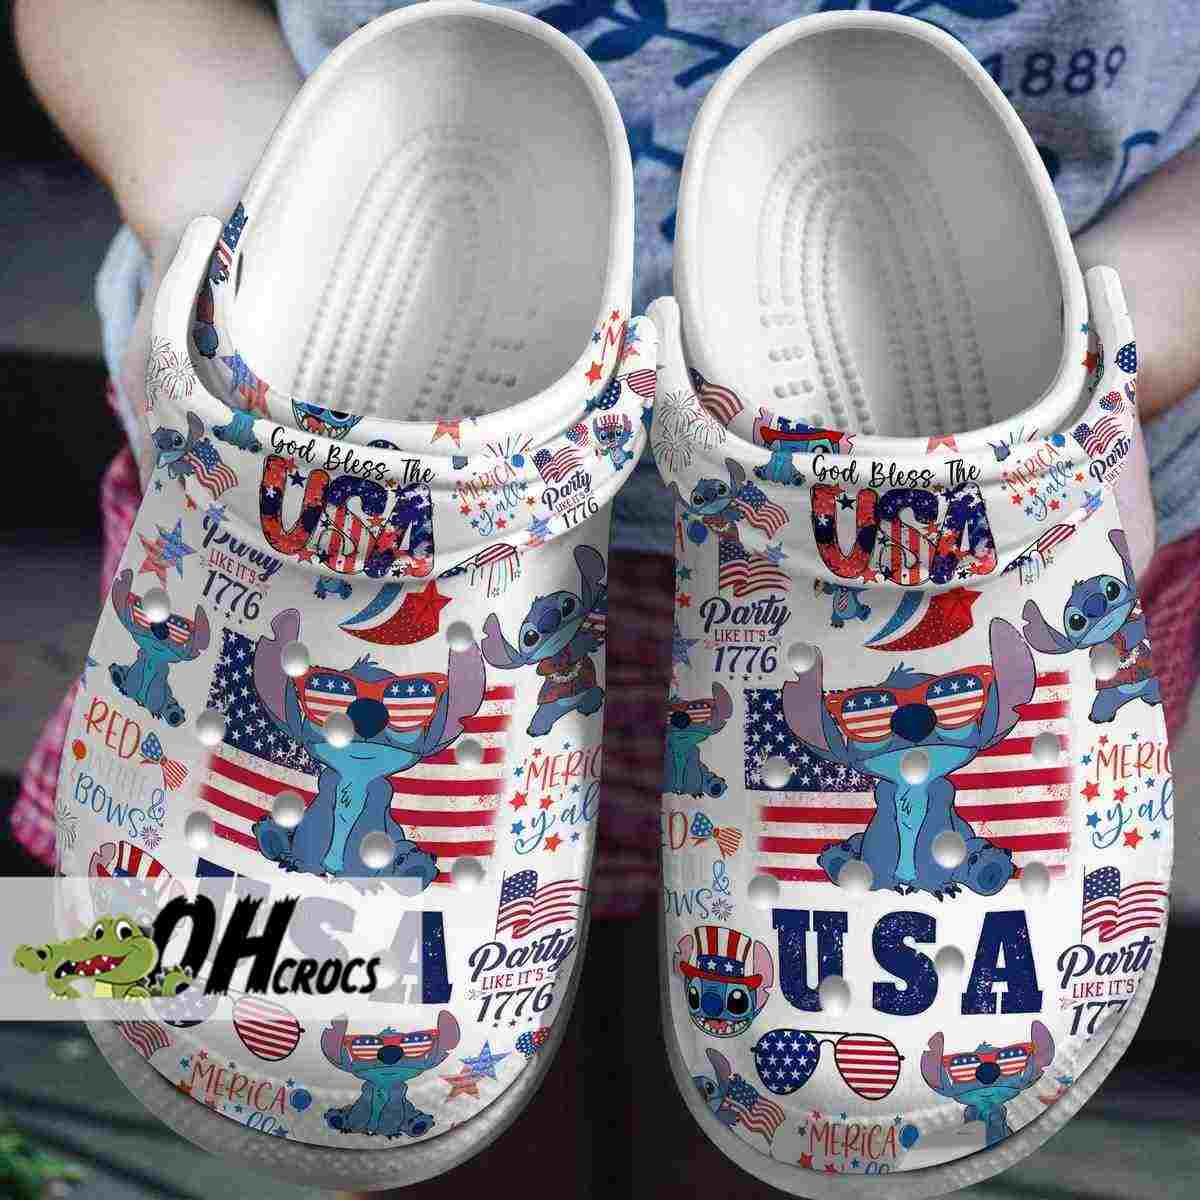 God Bless The USA 1776 Party Crocs Shoes